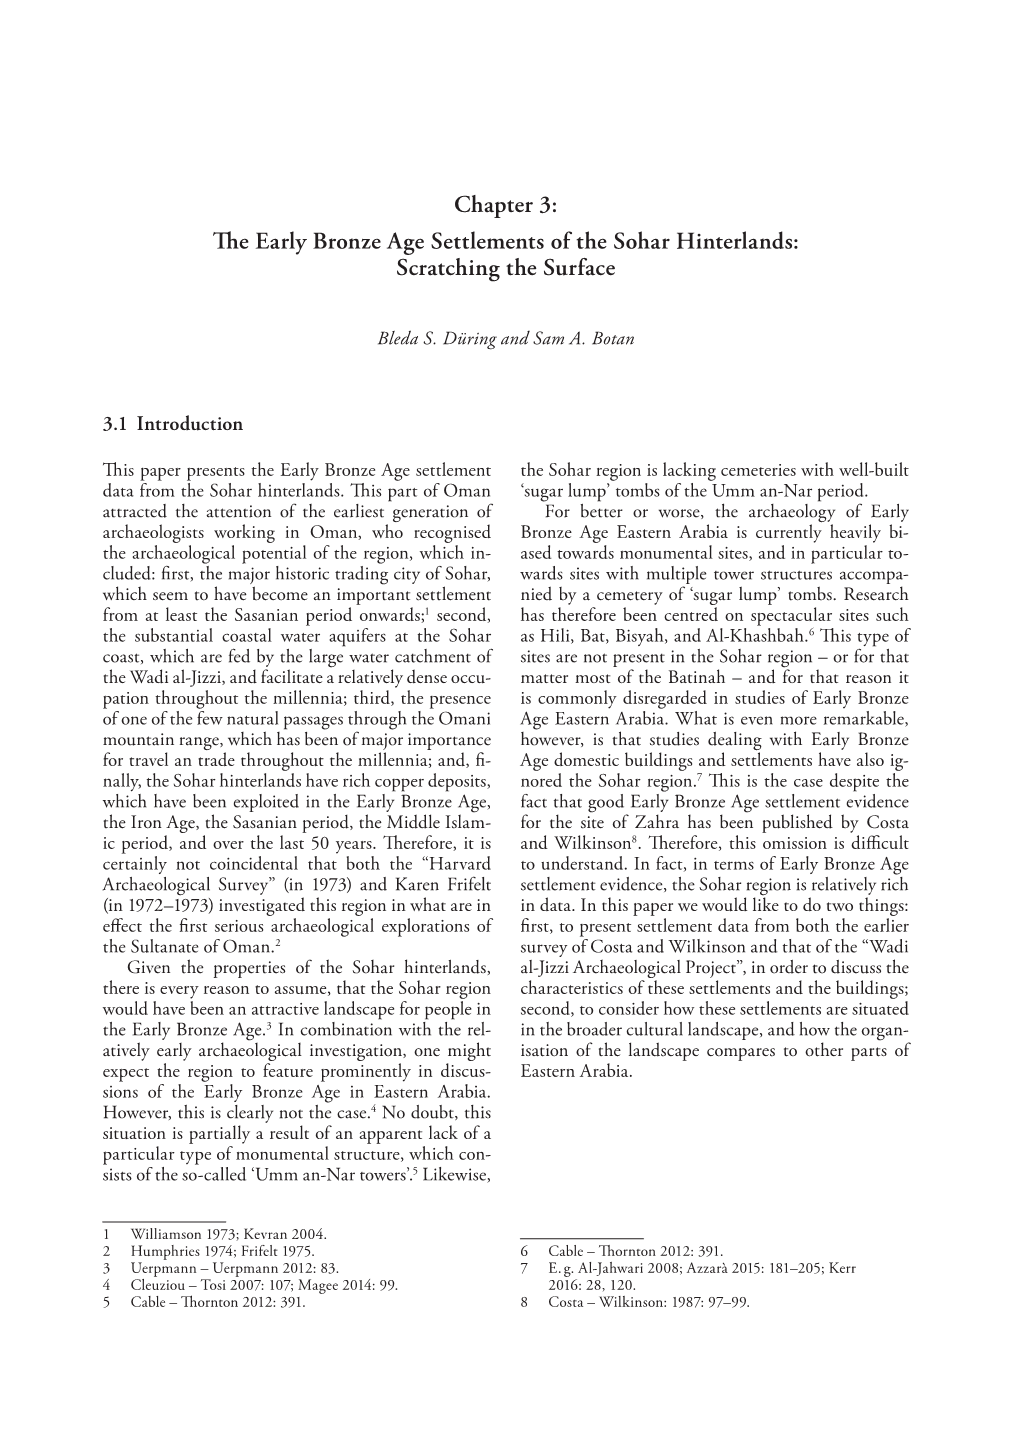 Chapter 3: the Early Bronze Age Settlements of the Sohar Hinterlands: Scratching the Surface